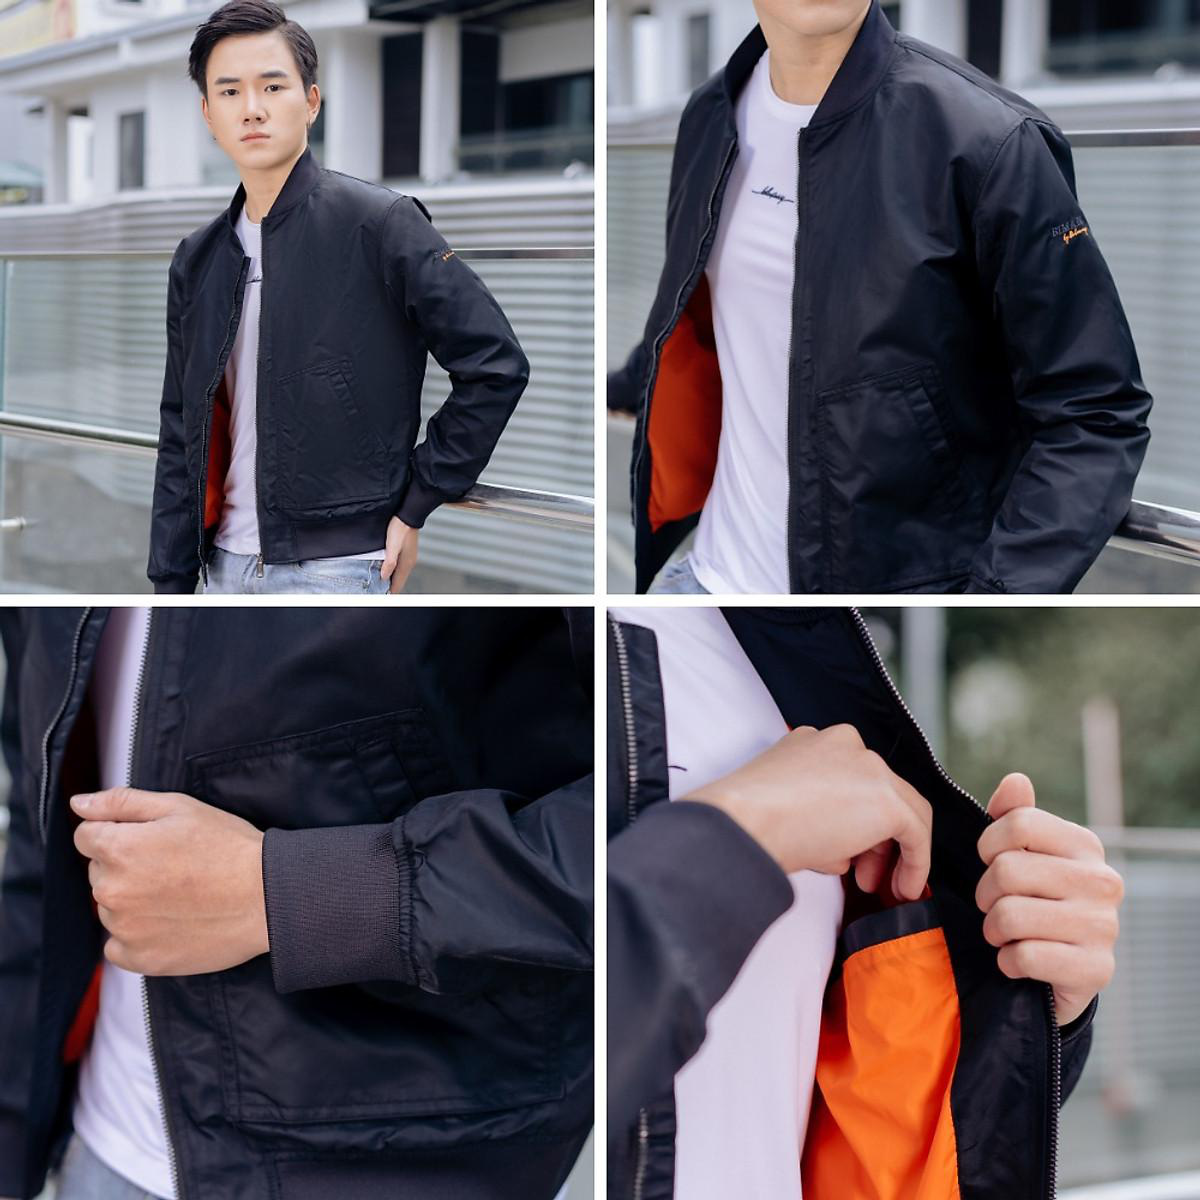 5 fashion items to wear in the beautiful New Year for men who pursue a minimalist style from only 99K - Photo 5.